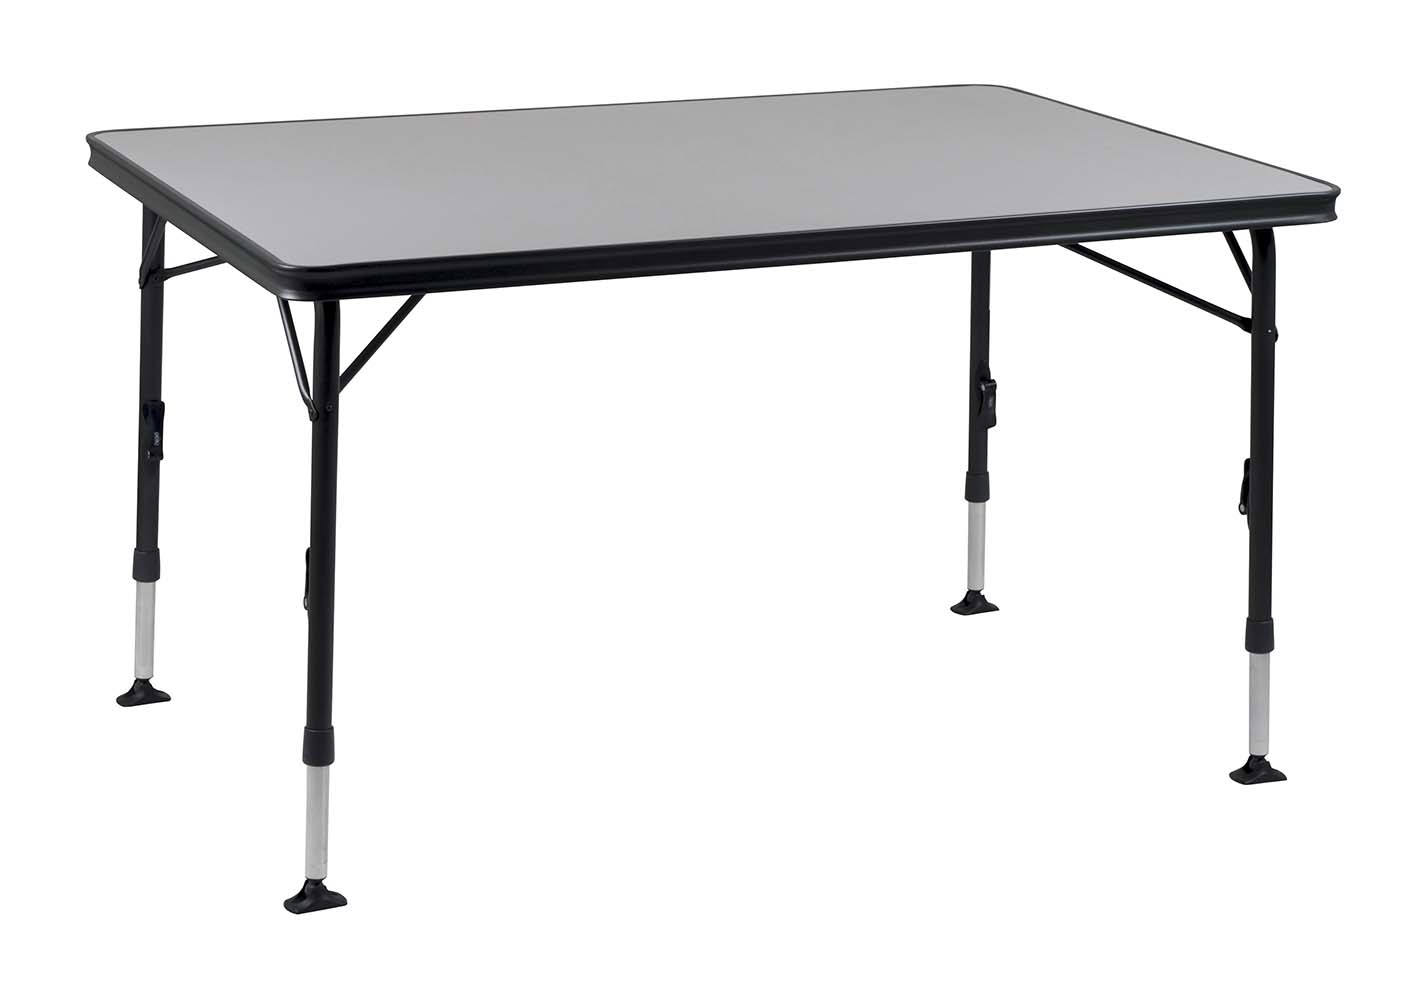 1151410 A stable high quality table. Thanks to its special construction this table is easy to open and close. In addition the feet are easy to mount in the guided aluminium rails on the underside of the table top. The table top is extra spacious so that it can accommodate up to 6 persons. The aluminium rails at the bottom of this camp table also provide additional reinforcement. The high-quality materials and heat-resistant and waterproof tabletop ensure a long service life. The feet provide high stability through the thick and extra-reinforced pipes. The stabilizing feet provide extra grip on any surface. This table is light weight because of the aluminium frame.